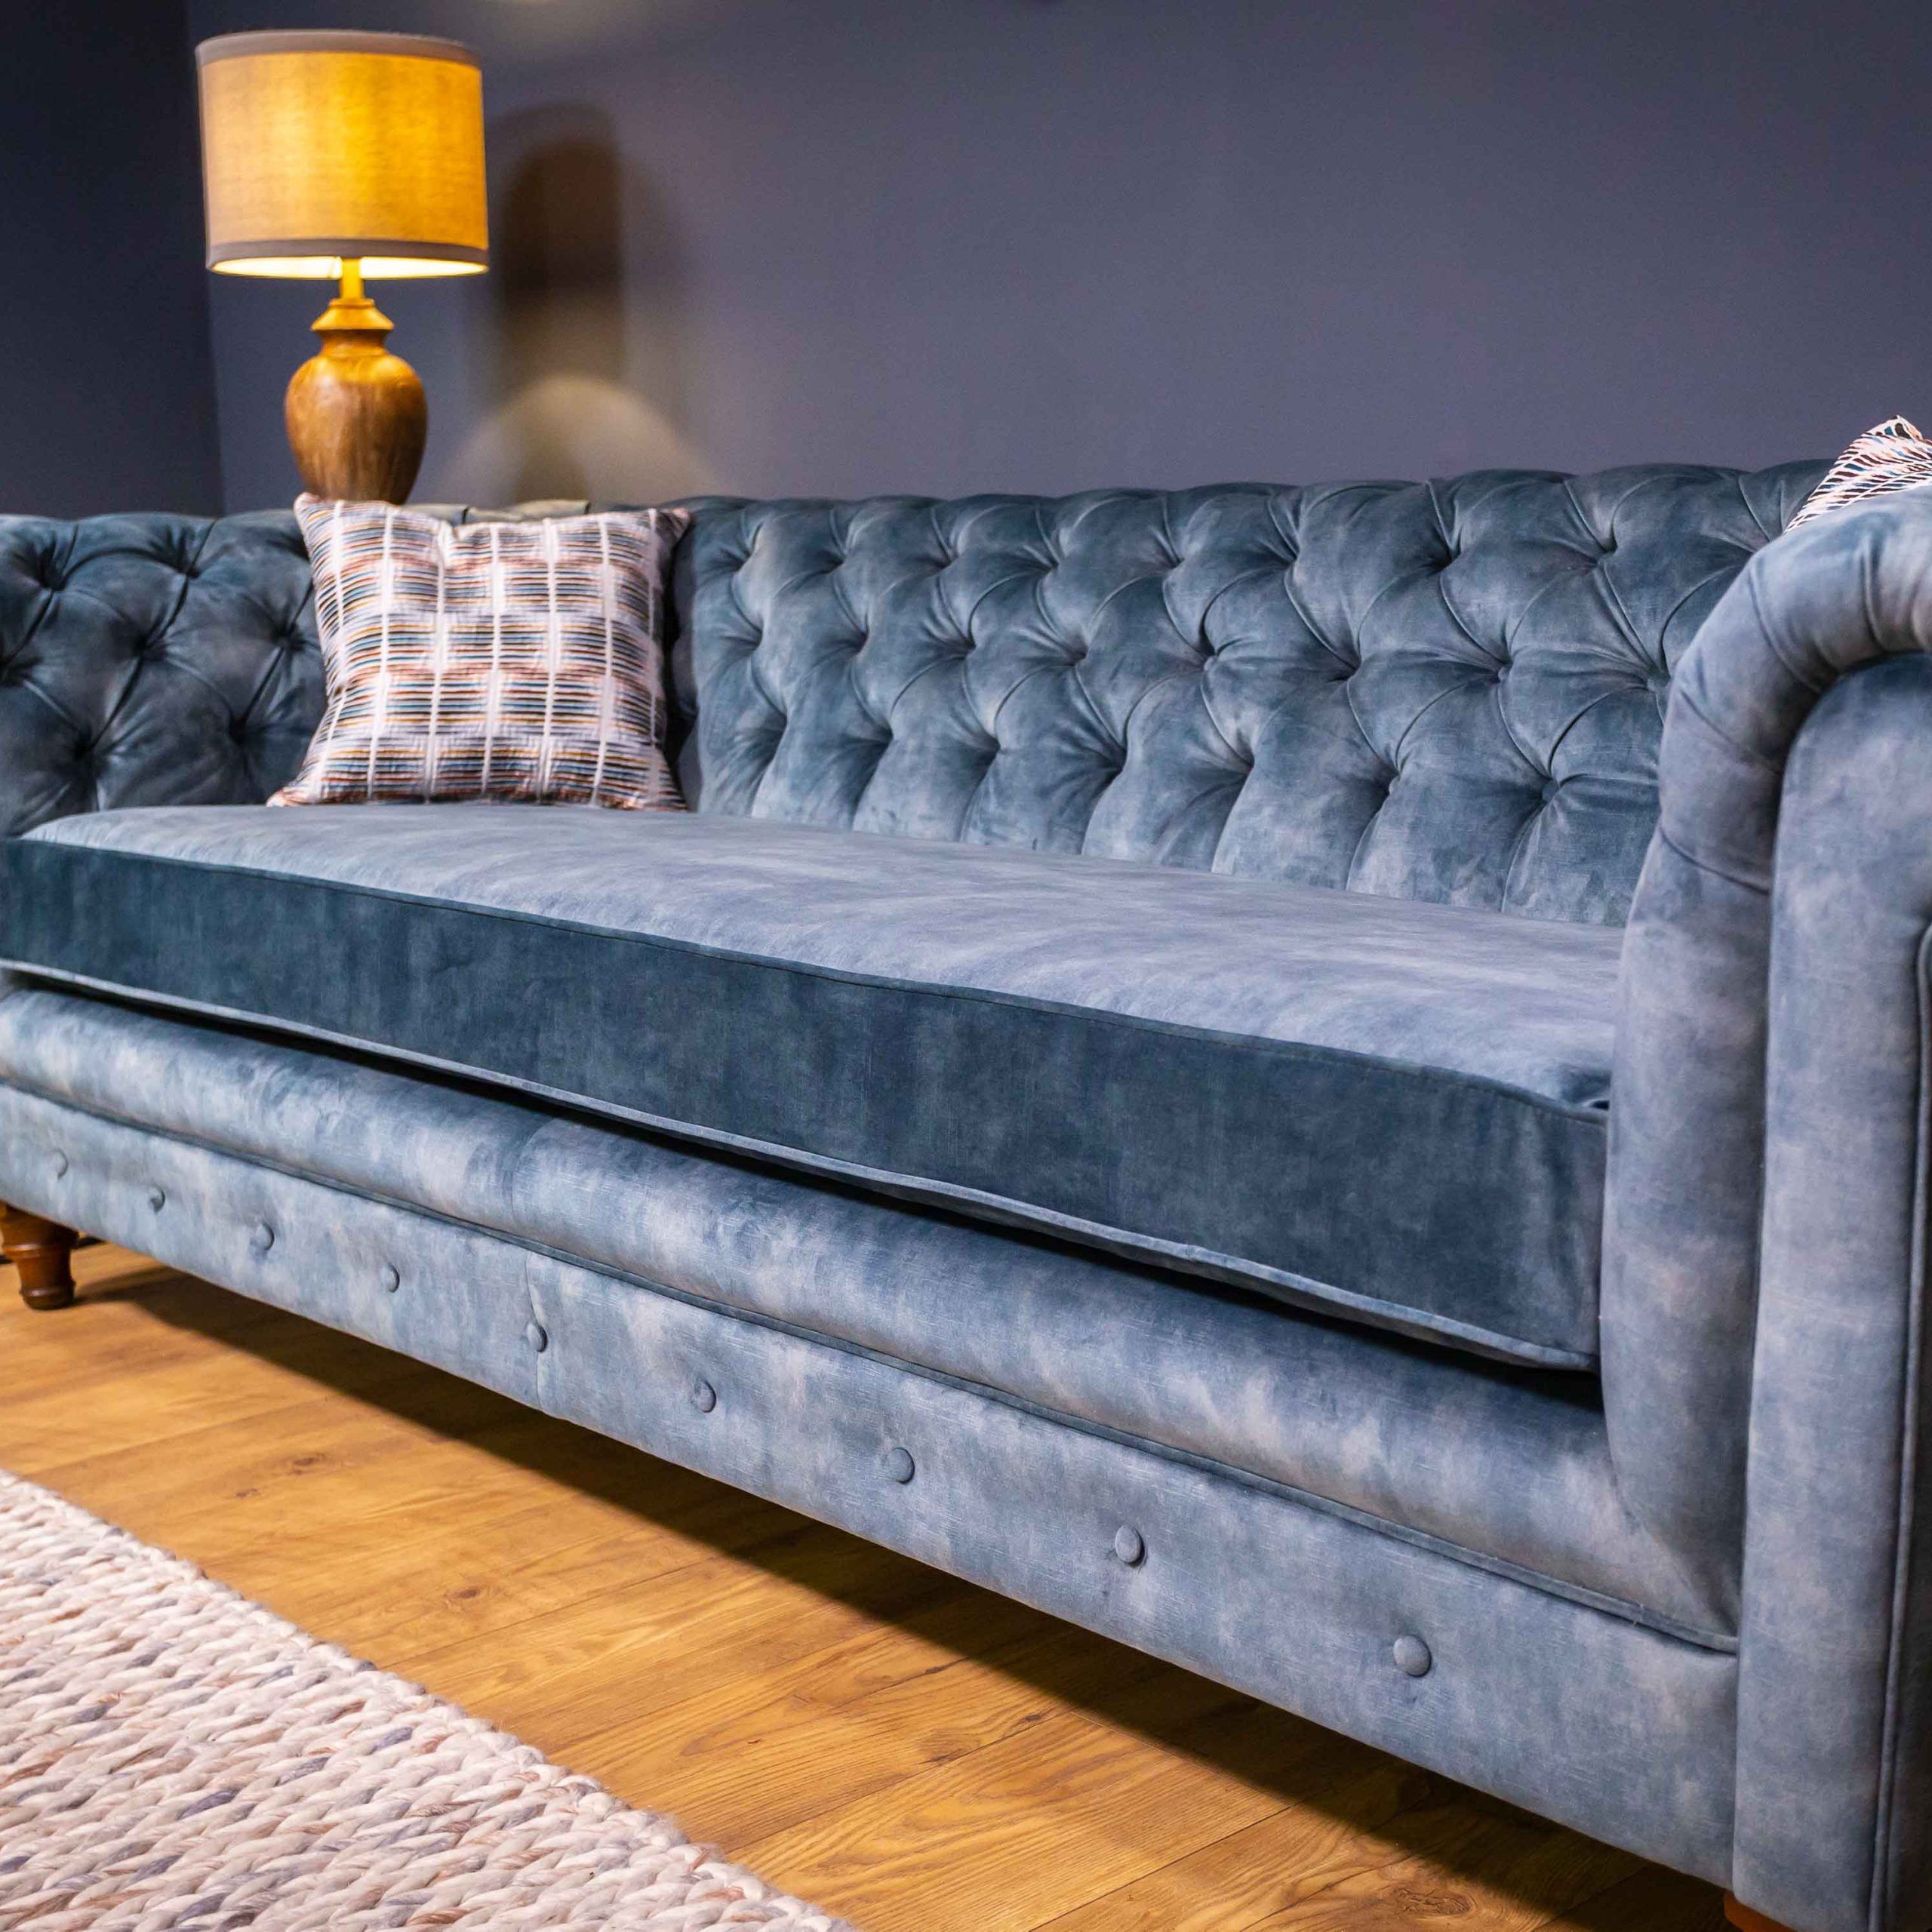 The Chesterfield Sofa | Sofa Range From Sofa Magic Bristol In Chesterfield Sofas (Gallery 1 of 21)